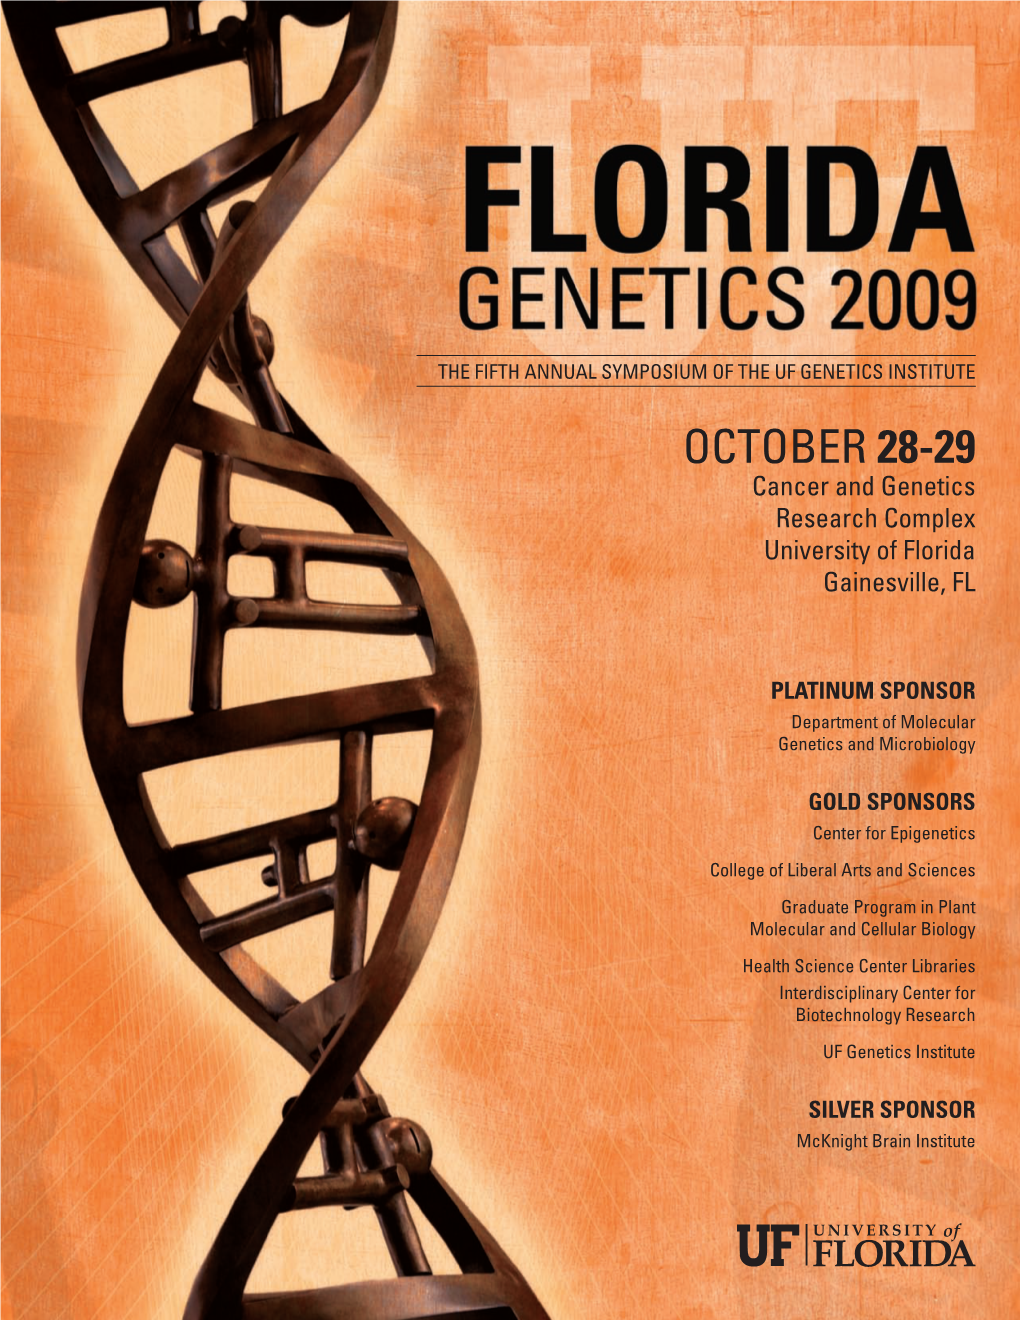 OCTOBER 28-29 Cancer and Genetics Research Complex University of Florida Gainesville, FL